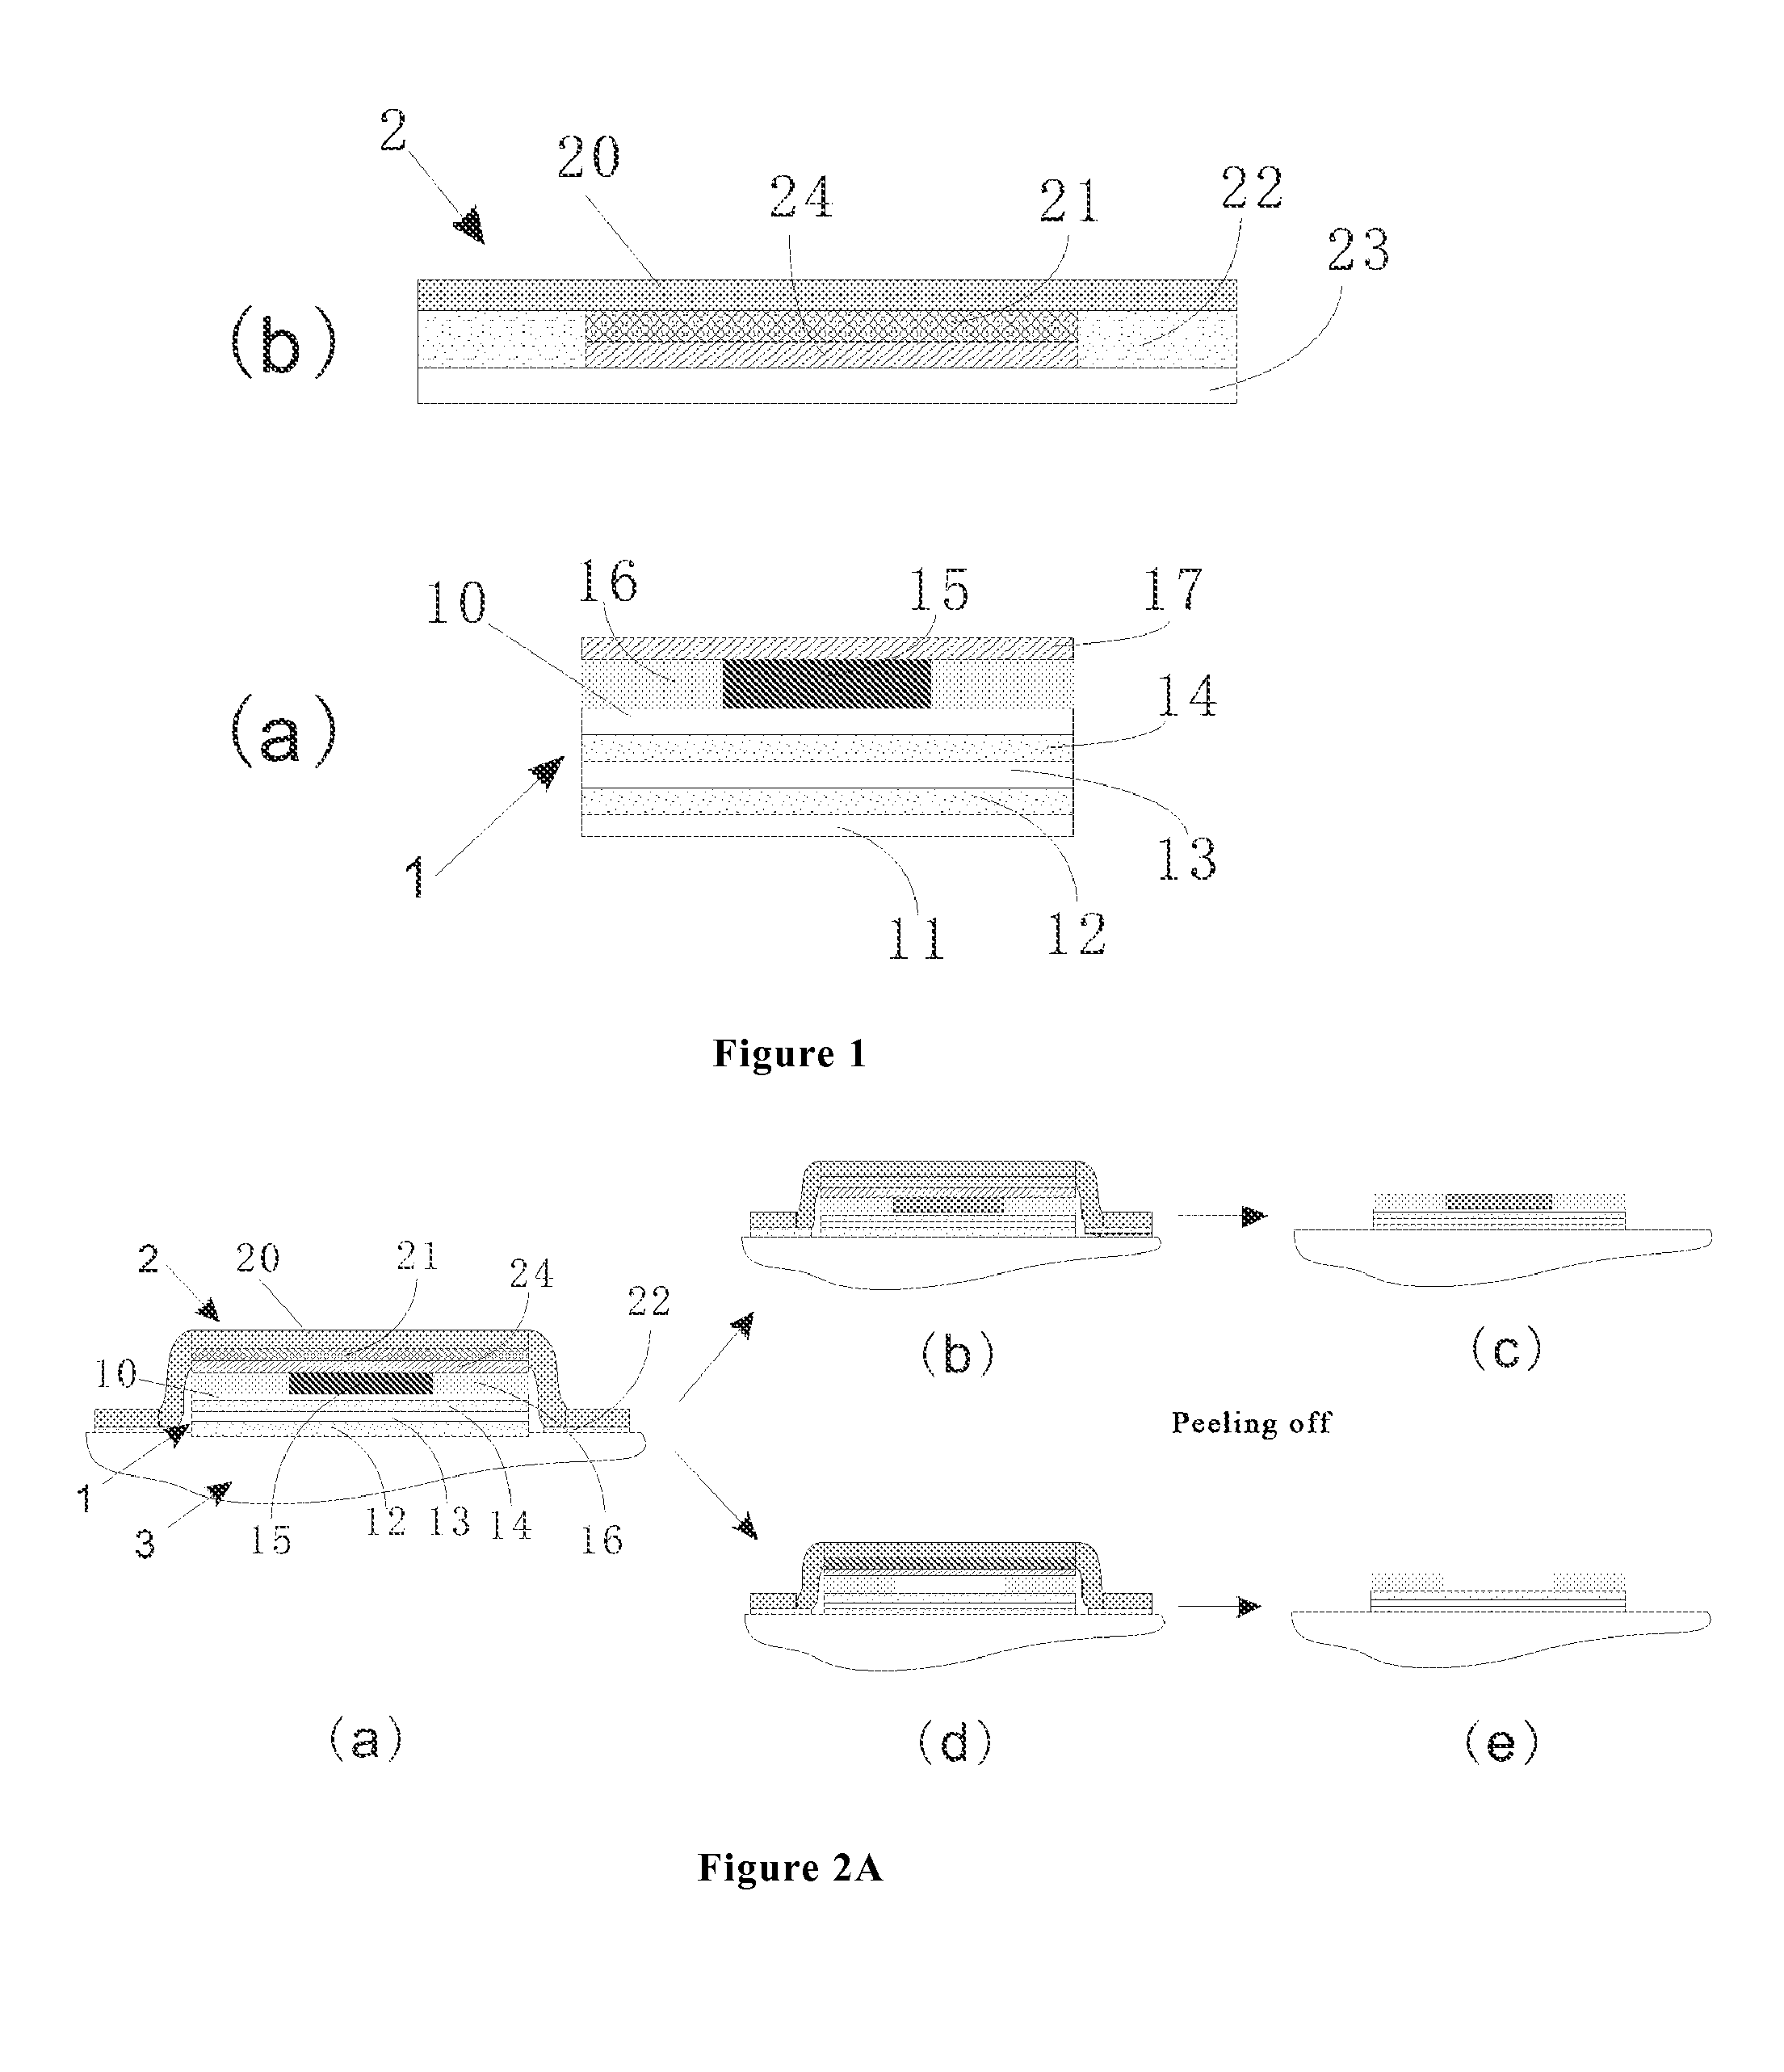 Time-temperature indicator and monitoring method for monitoring quality state of thermally sensitive article